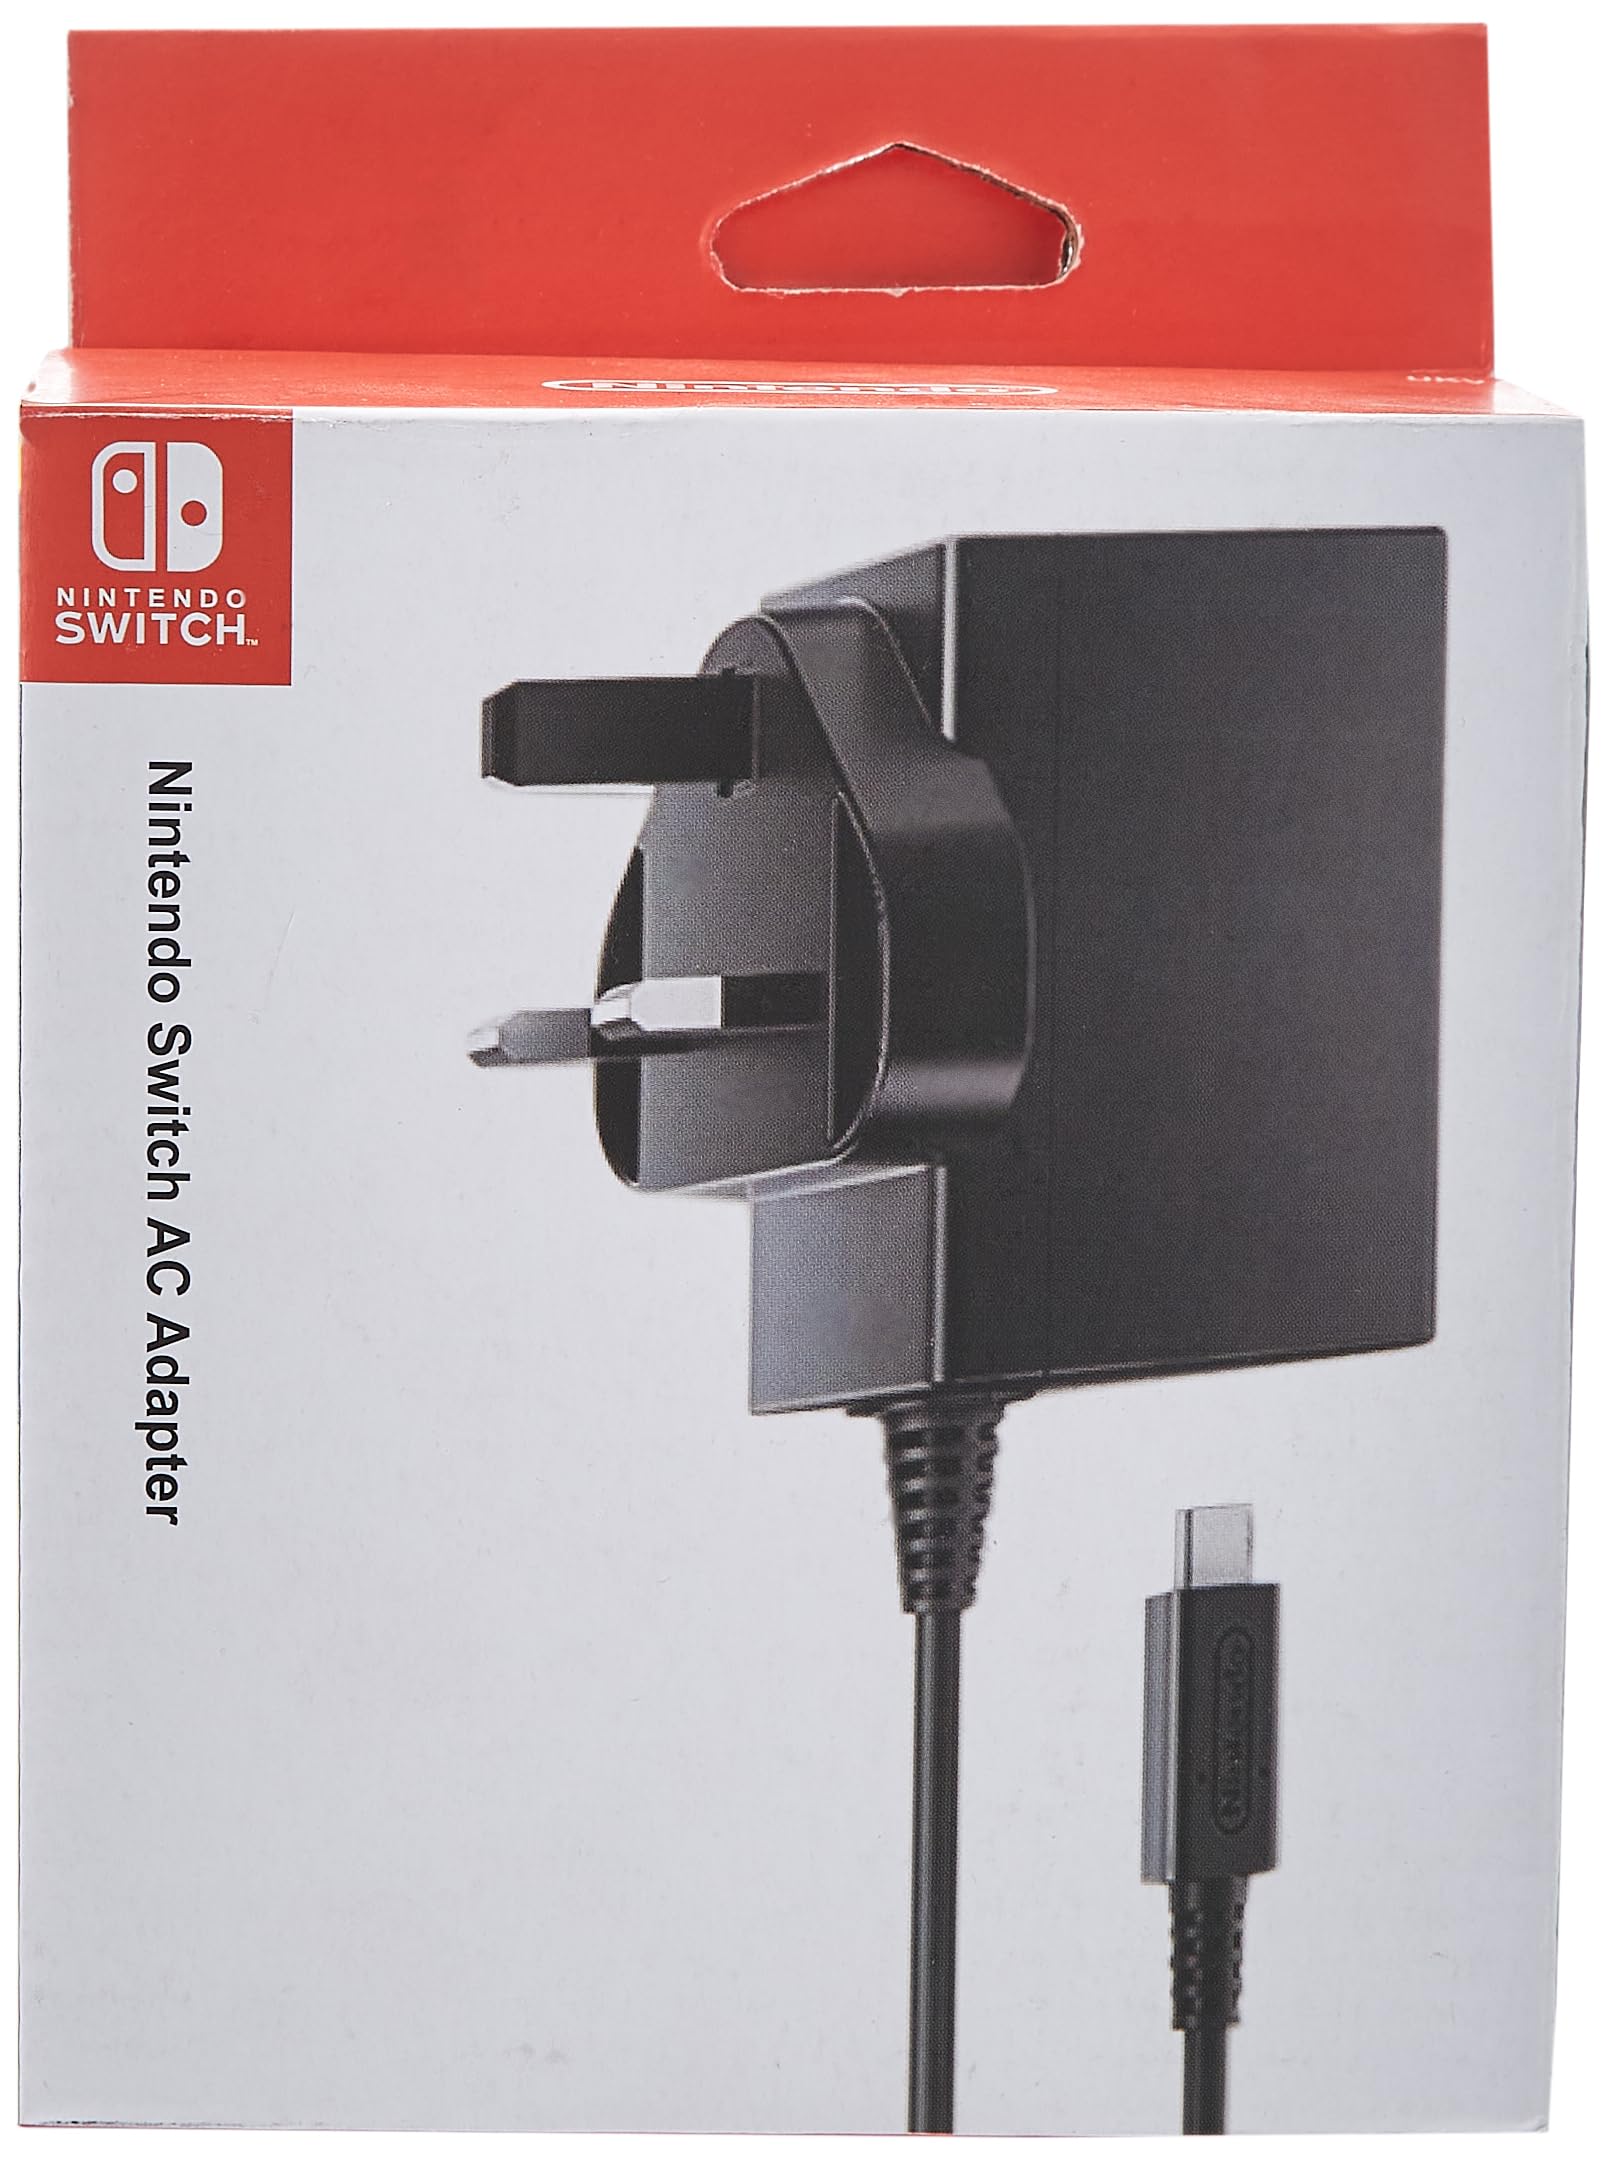 Nintendo Switch charging cable and adapter